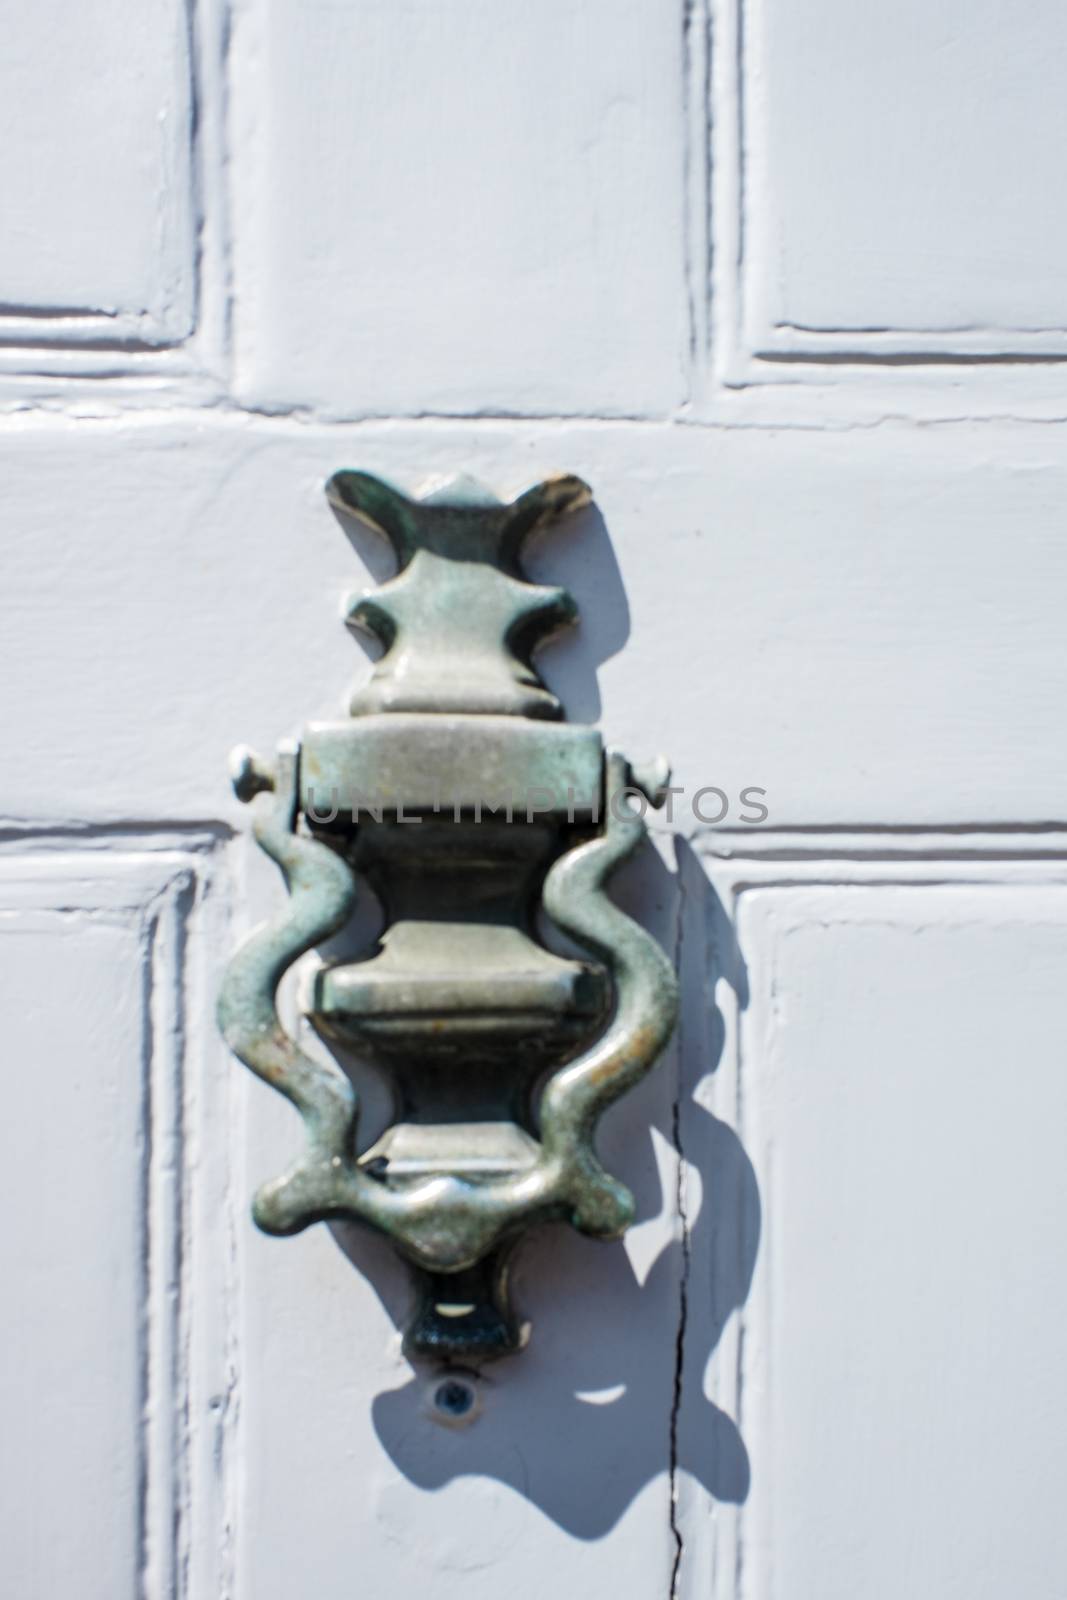 brass door knockers on cottage doors in the Cotswolds UK by paddythegolfer